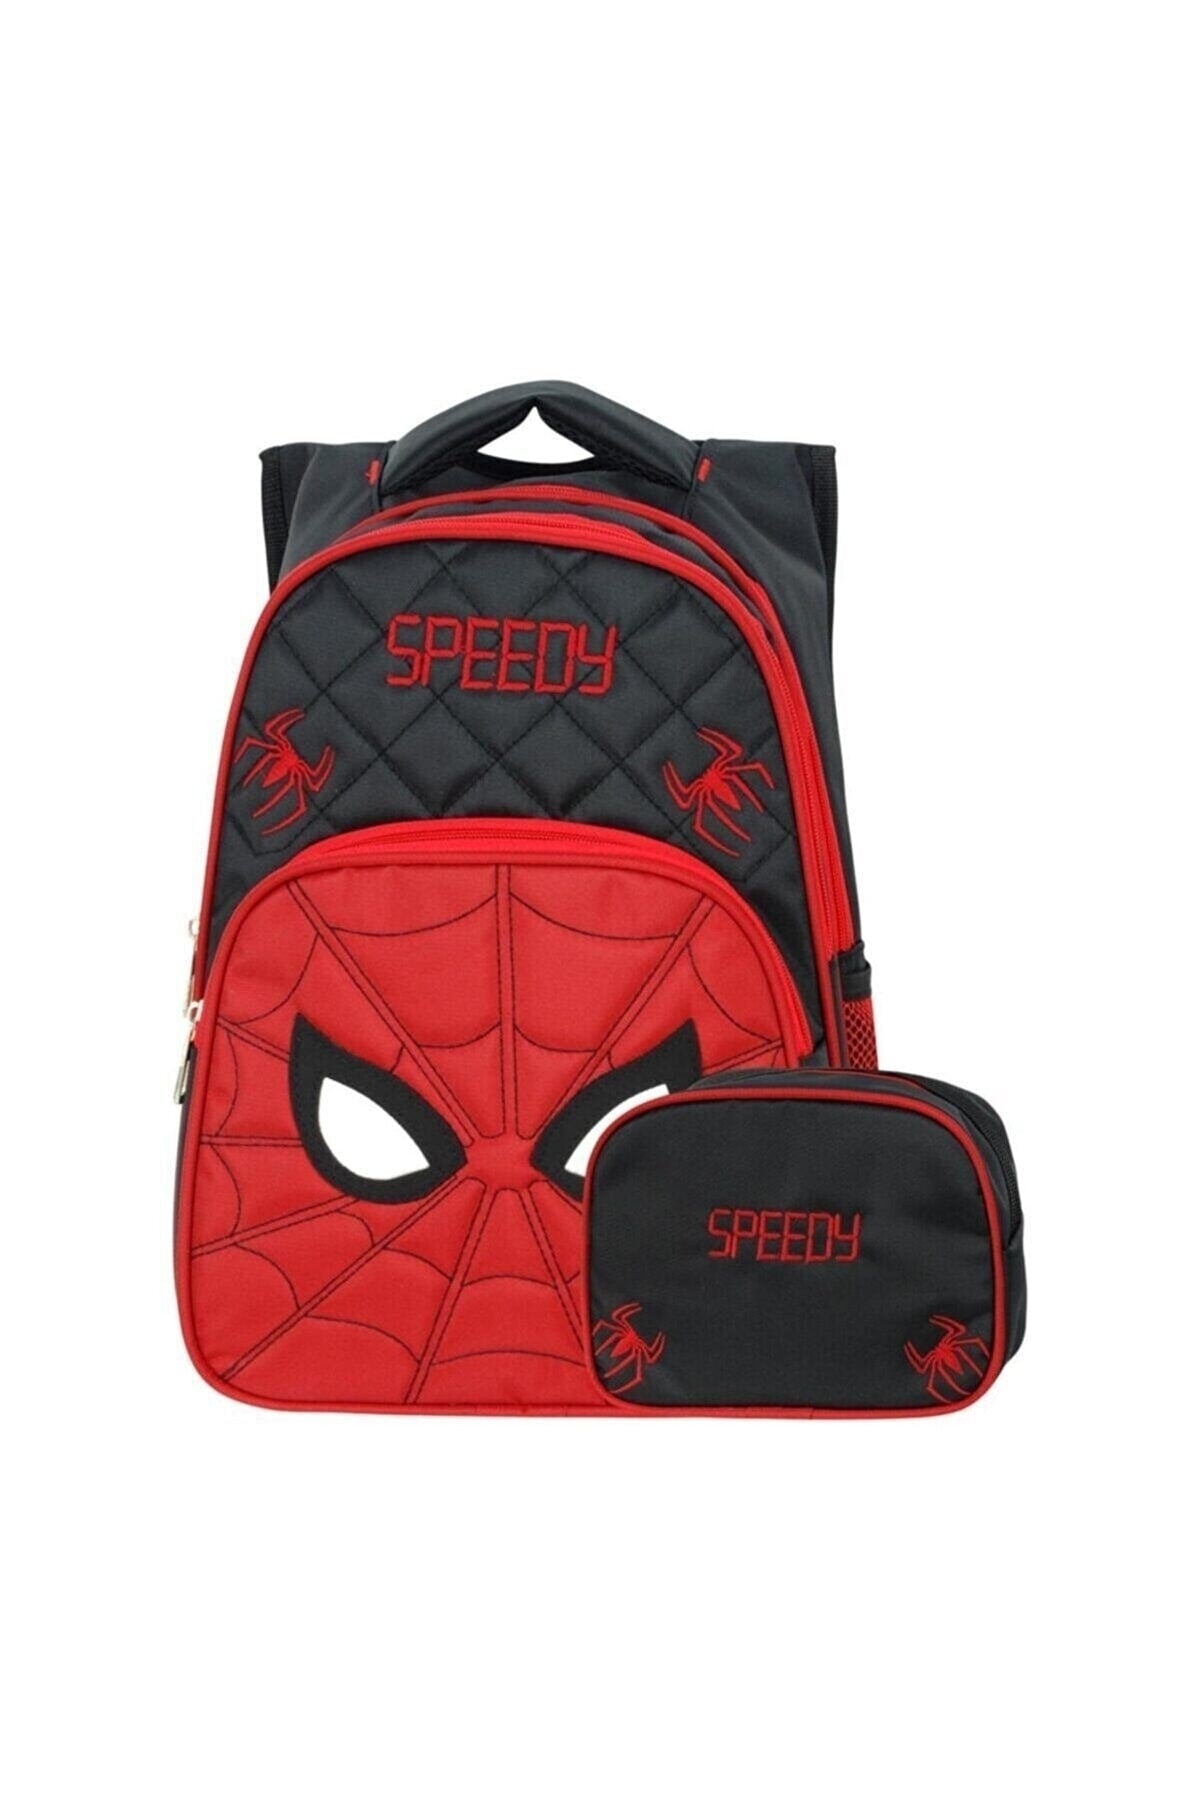 Licensed Spider Eye Primary Bag And Lunch Box